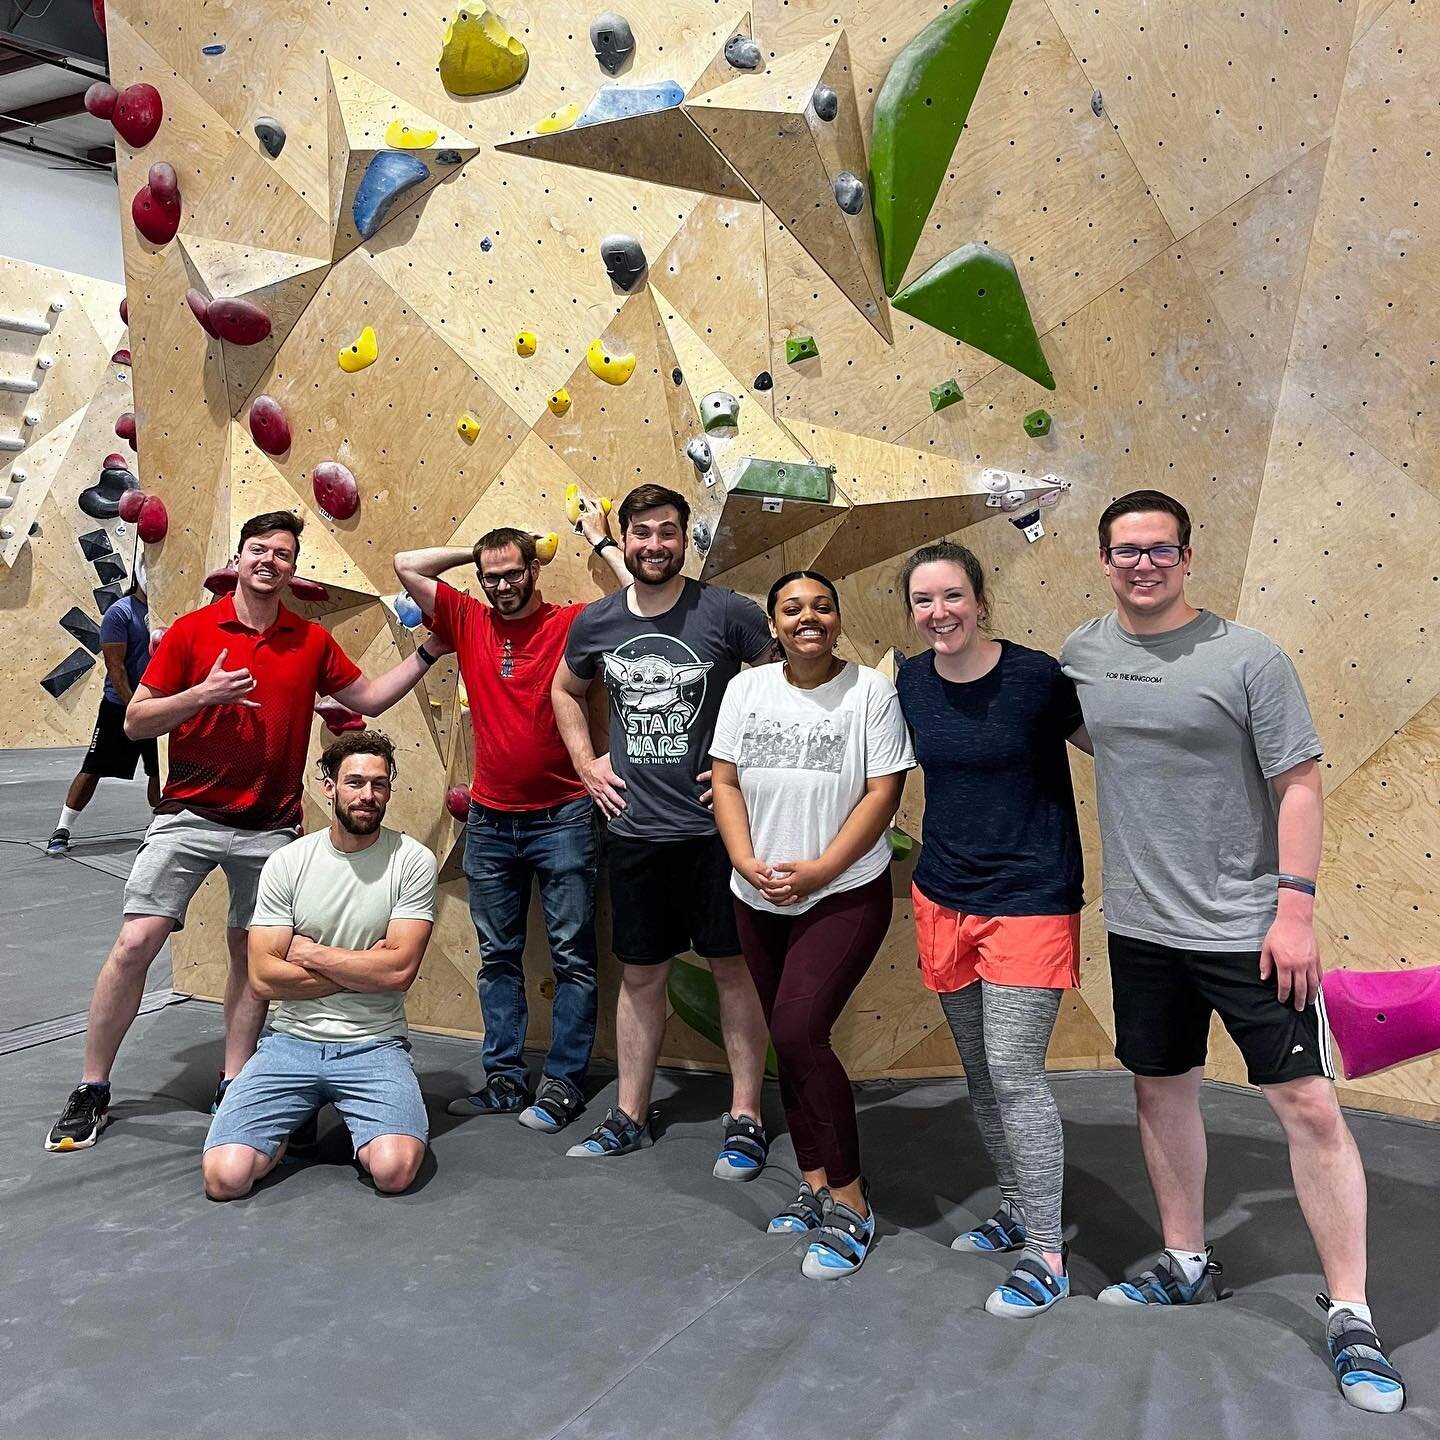 We had a great time doing some indoor climbing together!
#morningsidegvl #morningsideyp #pursue #climbing